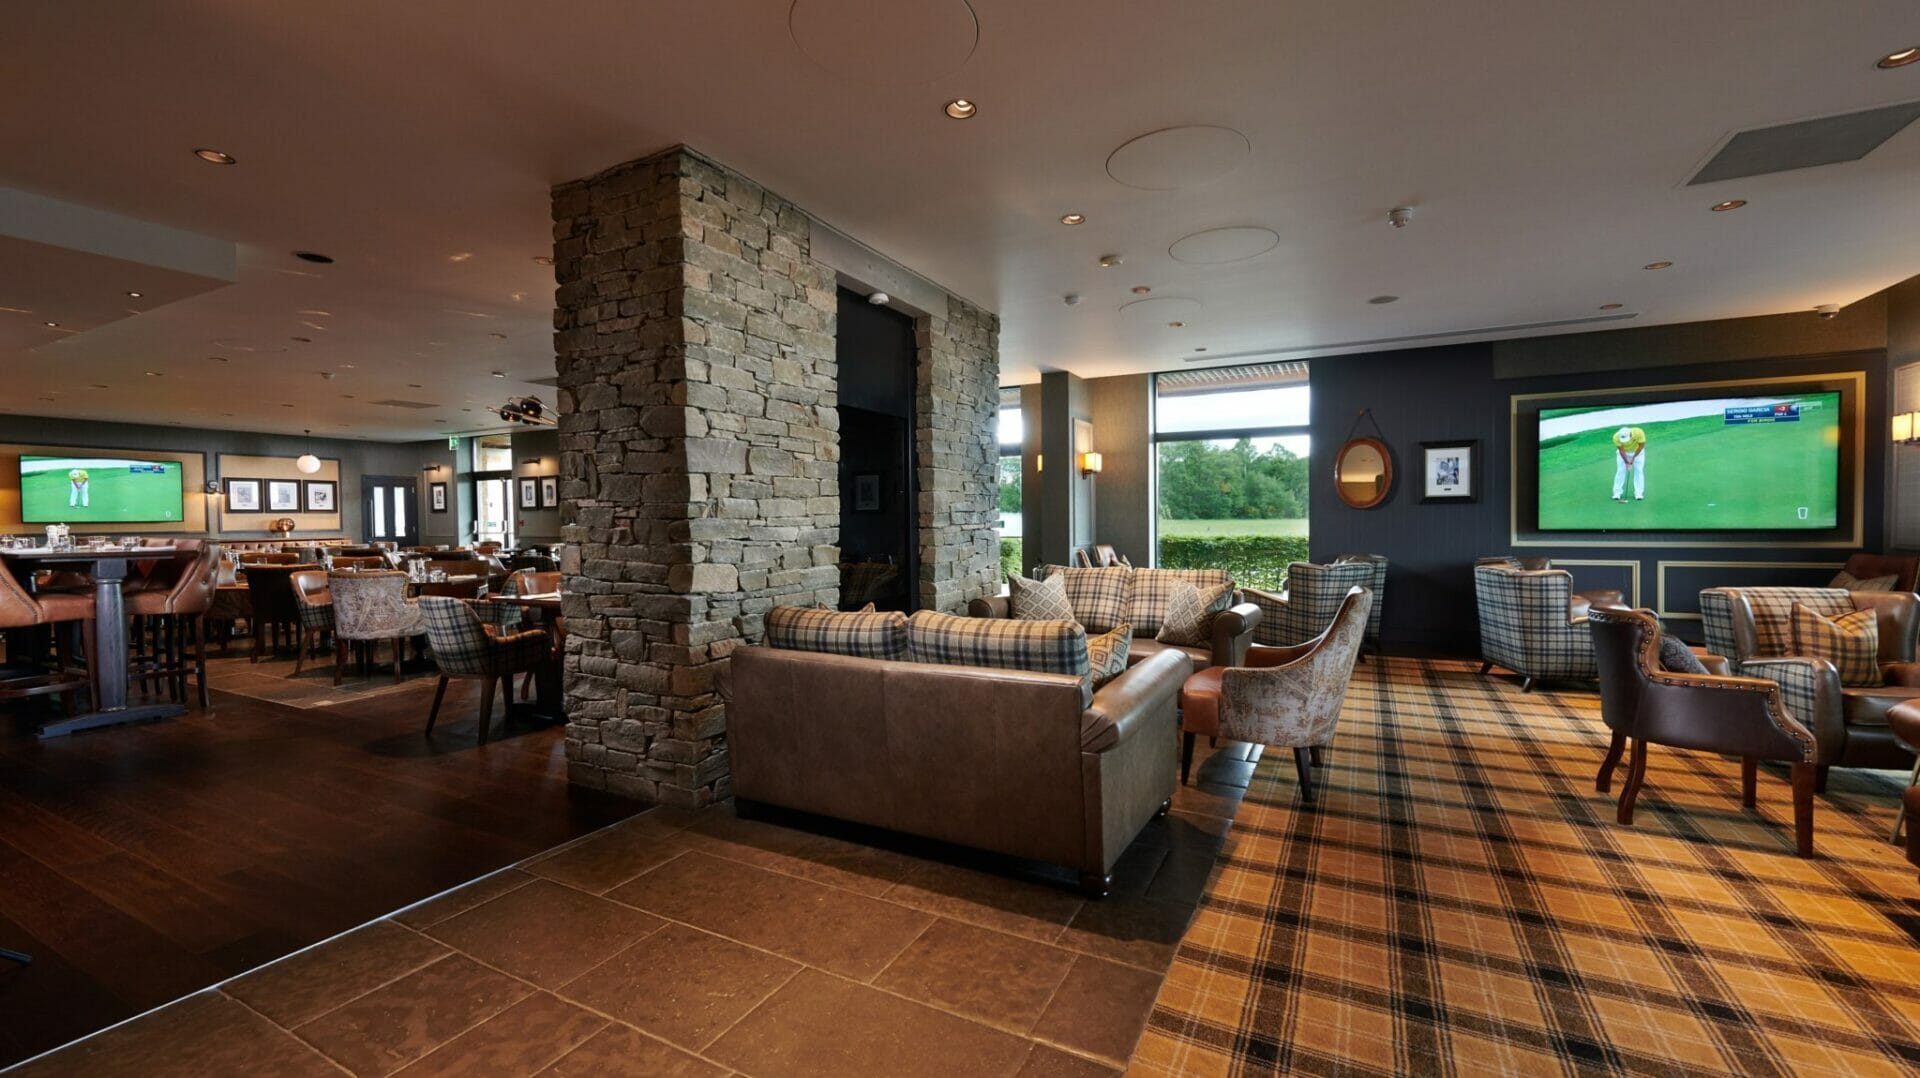 CAMERON HOUSE RESORT UNVEILS FIRST PHASE OF TWO MILLION POUND UPGRADE TO ITS CLUBHOUSE AND SPA